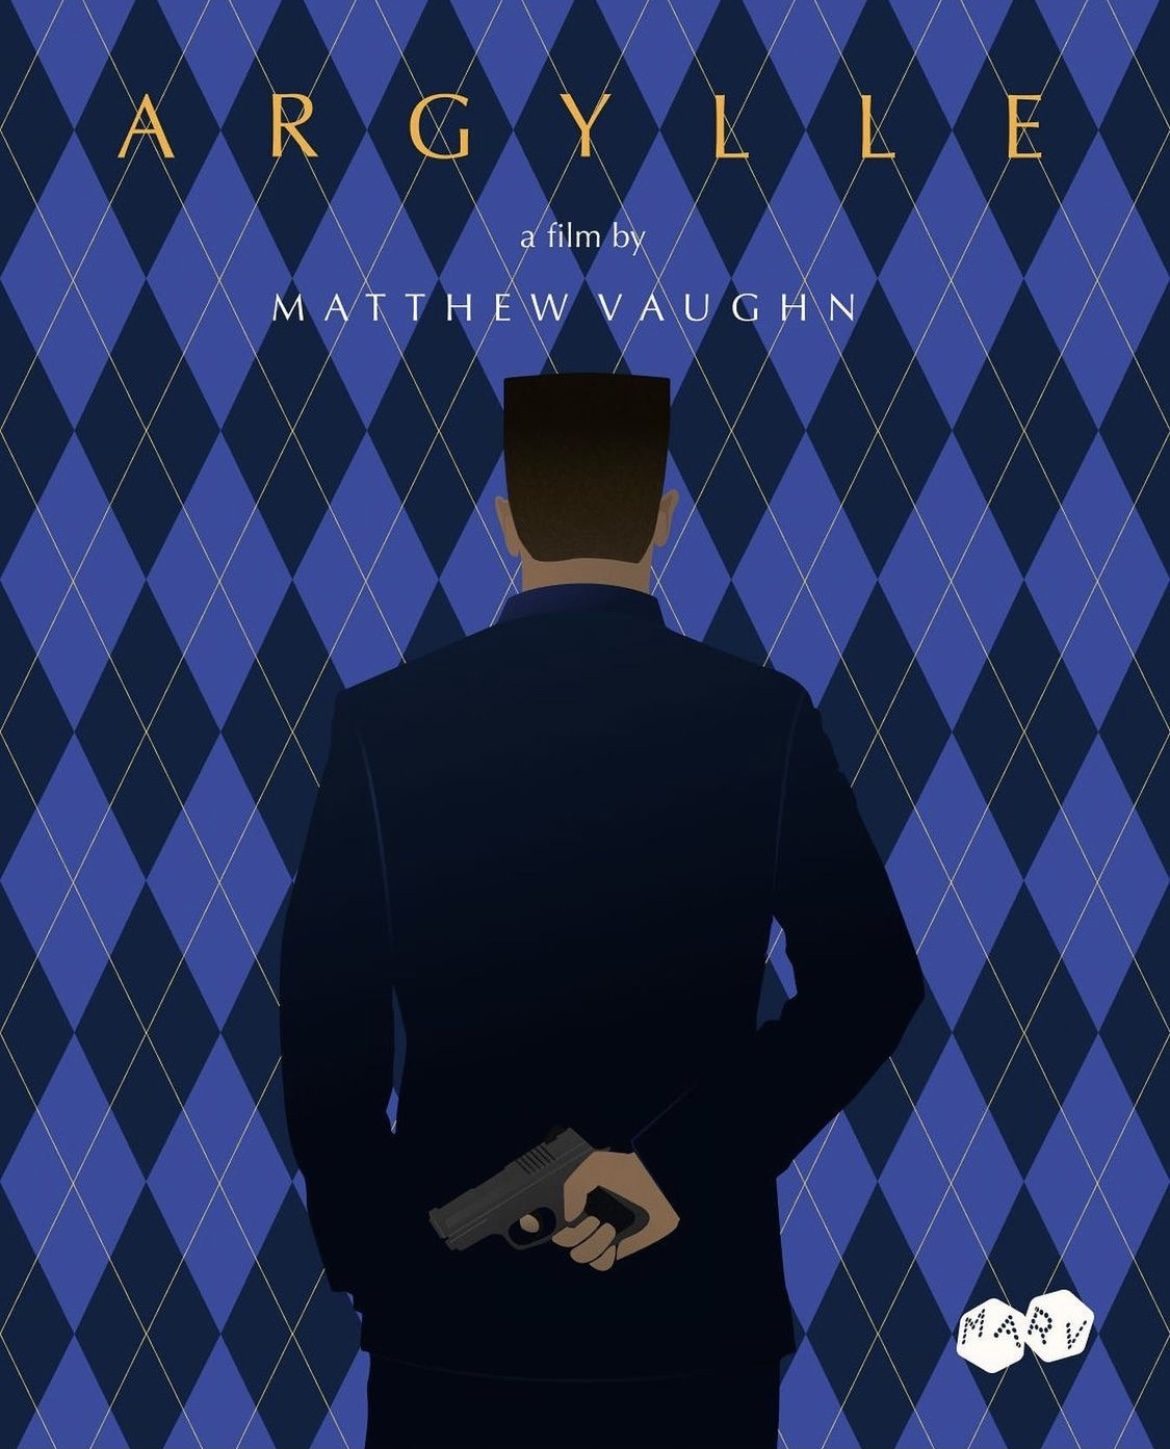 "Argylle a film by Matthew Vaughn" with a character with back showing and gun behind his arm - poster